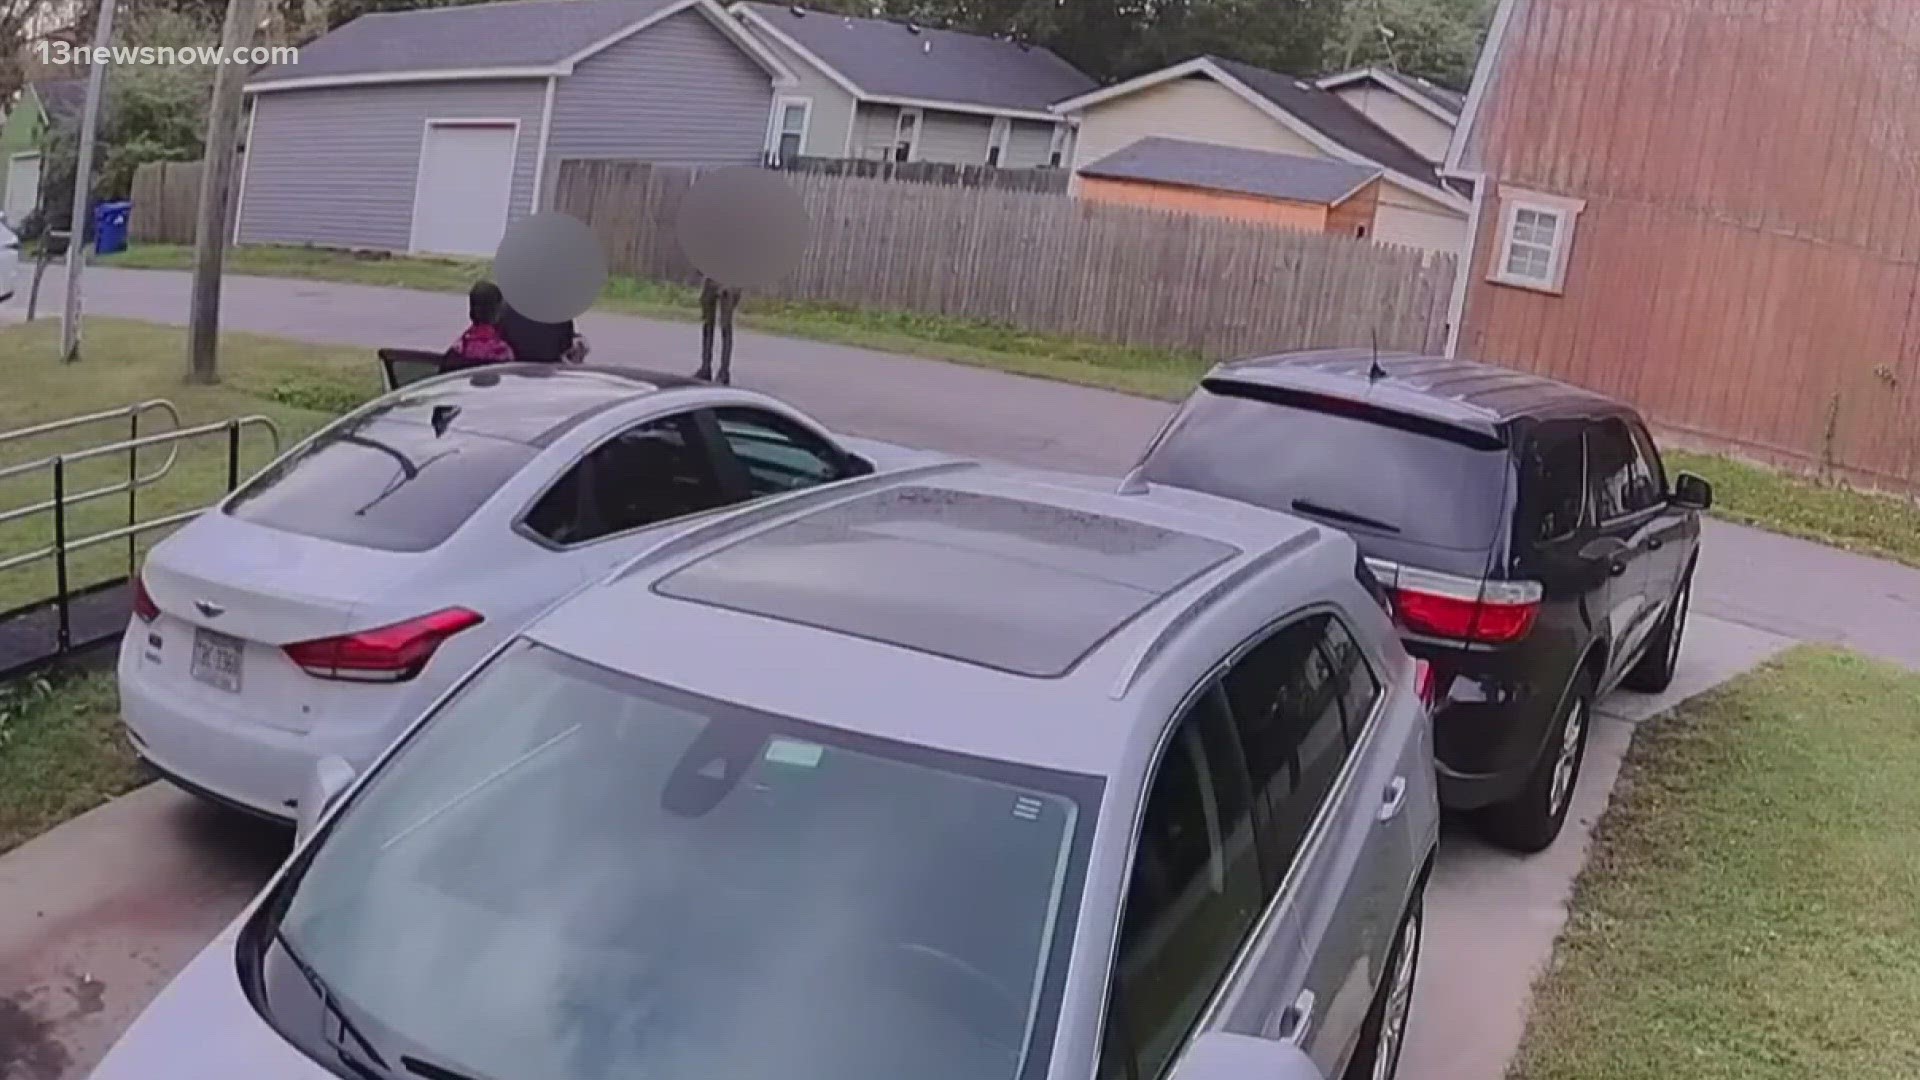 A home security camera caught the moment two juveniles approached a Portsmouth woman with a gun and stole her car in broad daylight.